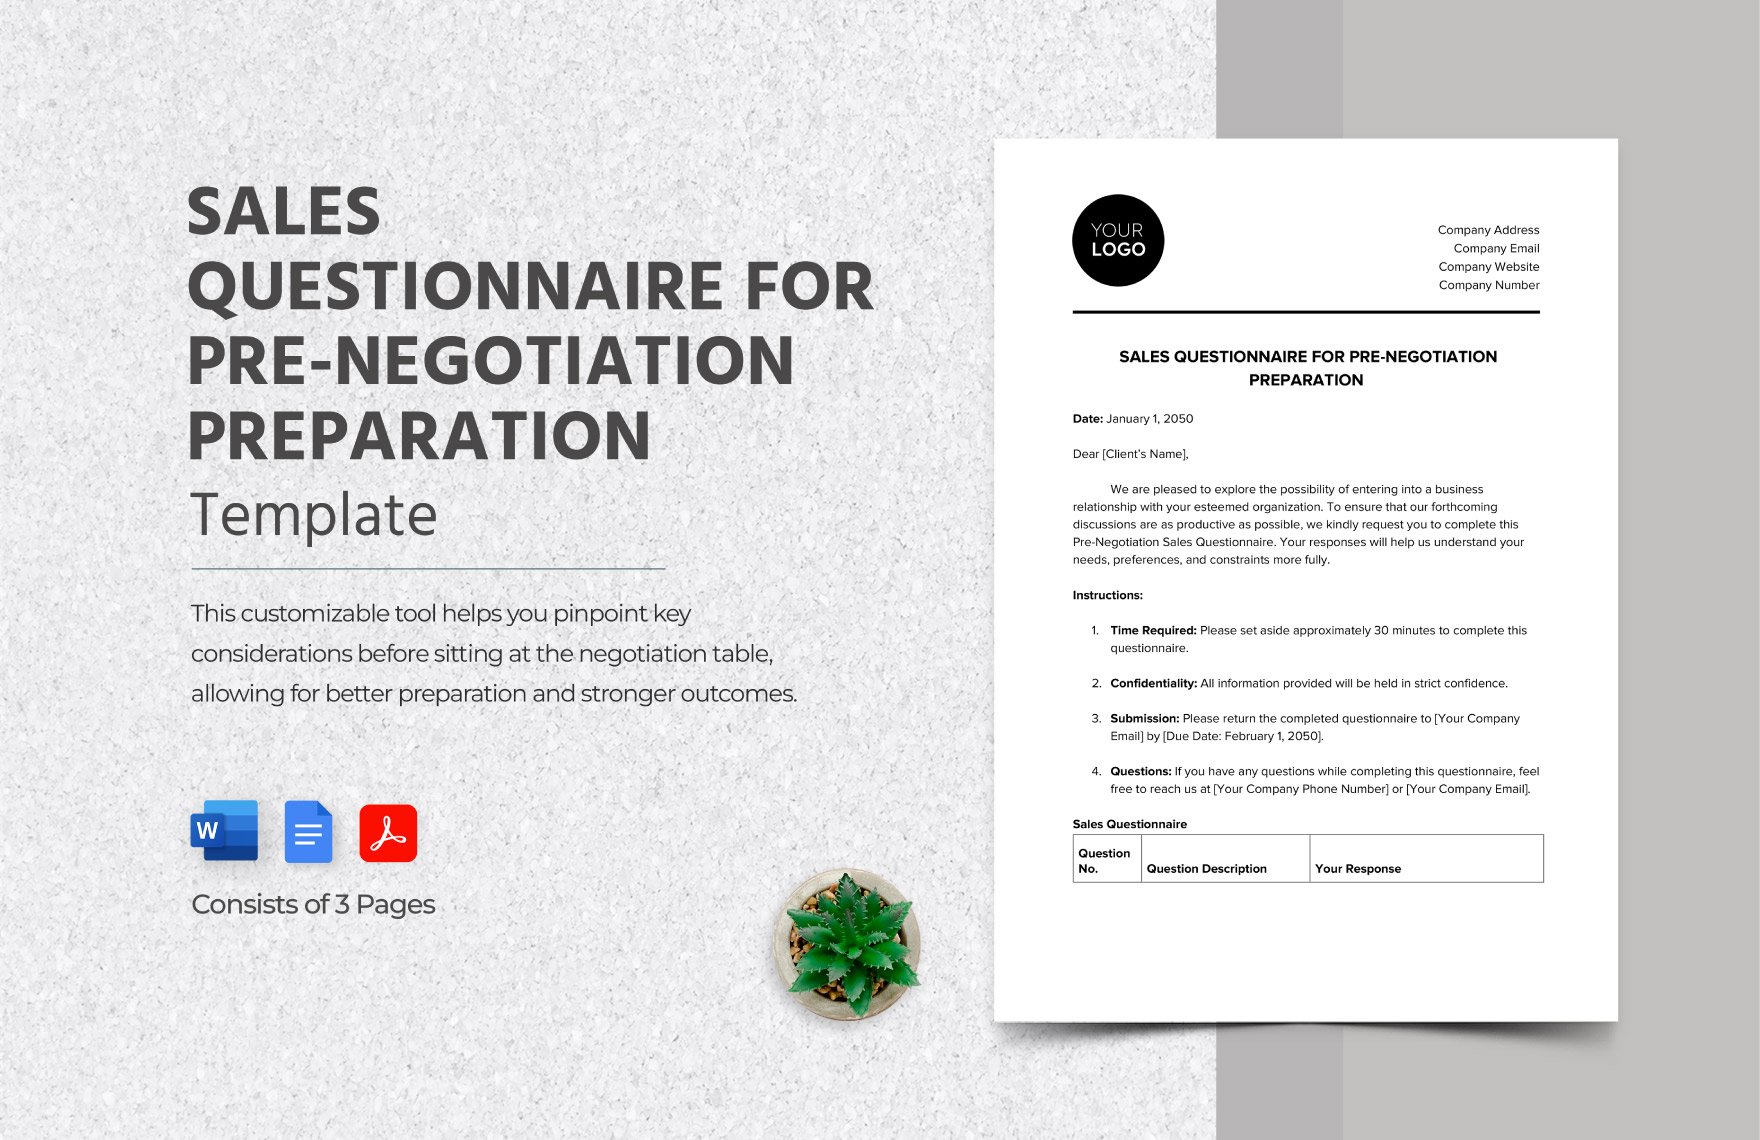 Sales Questionnaire for Pre-Negotiation Preparation Template in Word, Google Docs, PDF